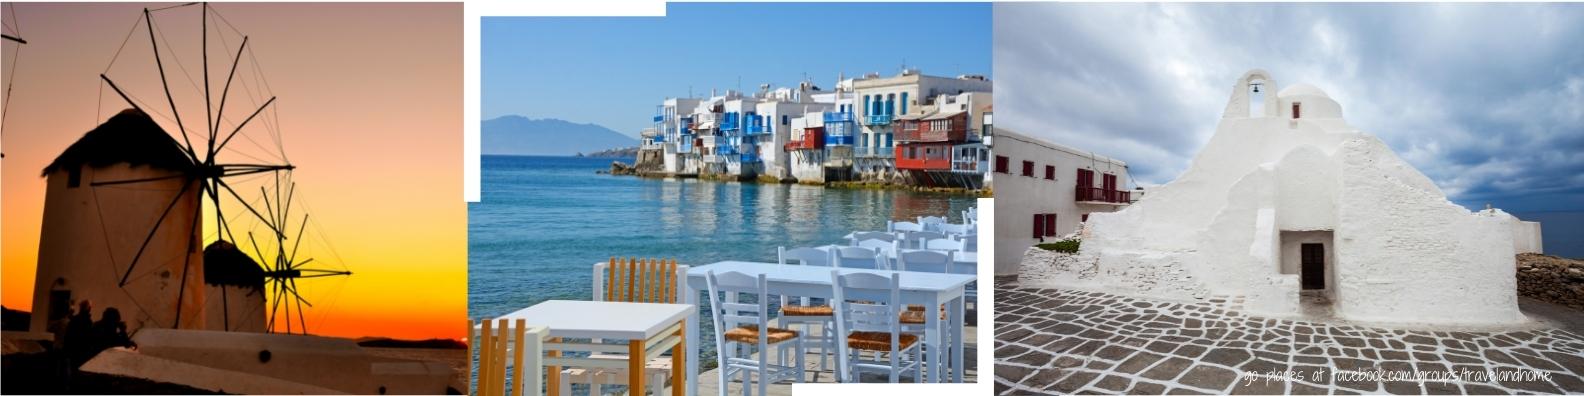 Mykonos best sightseeing and top attractions windmills little venice Panagia Paraportiani church